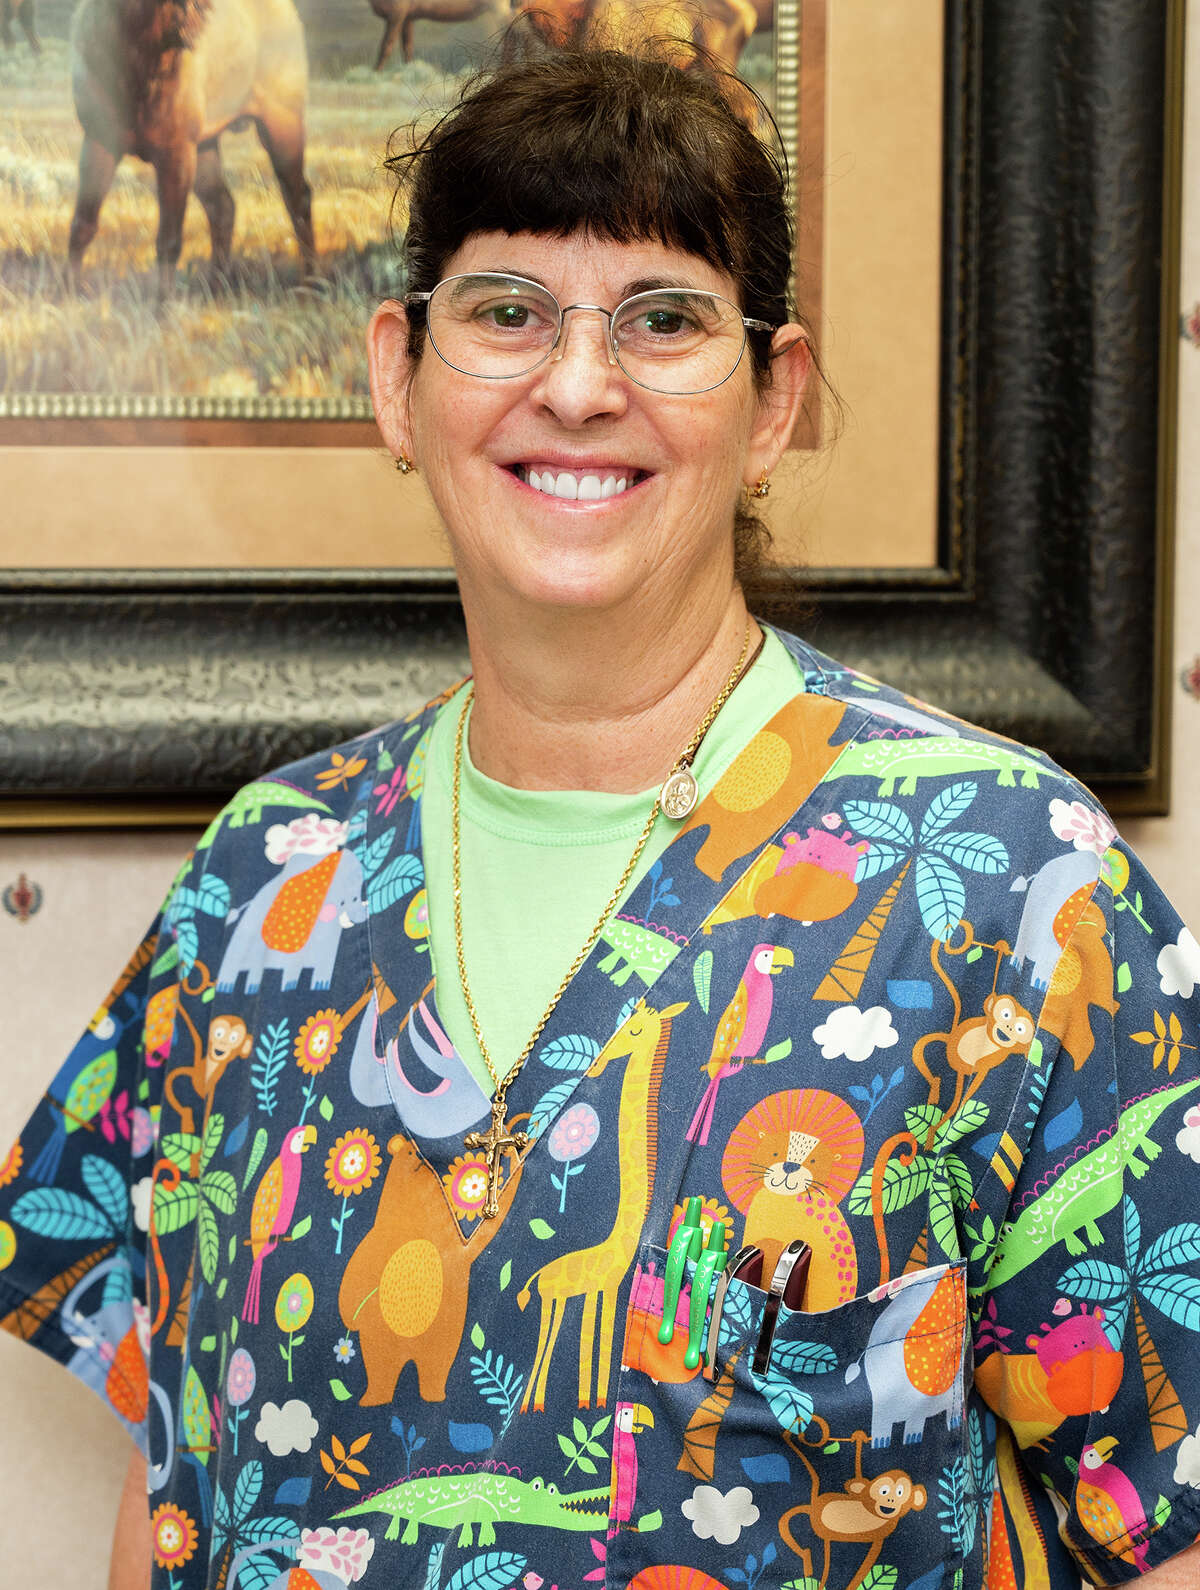 Veterinarian Sandra Leyendecker is selected as a 2021 Tejano Achiever Honoree, Thursday, Oct. 14, 2021, at Critter Care.